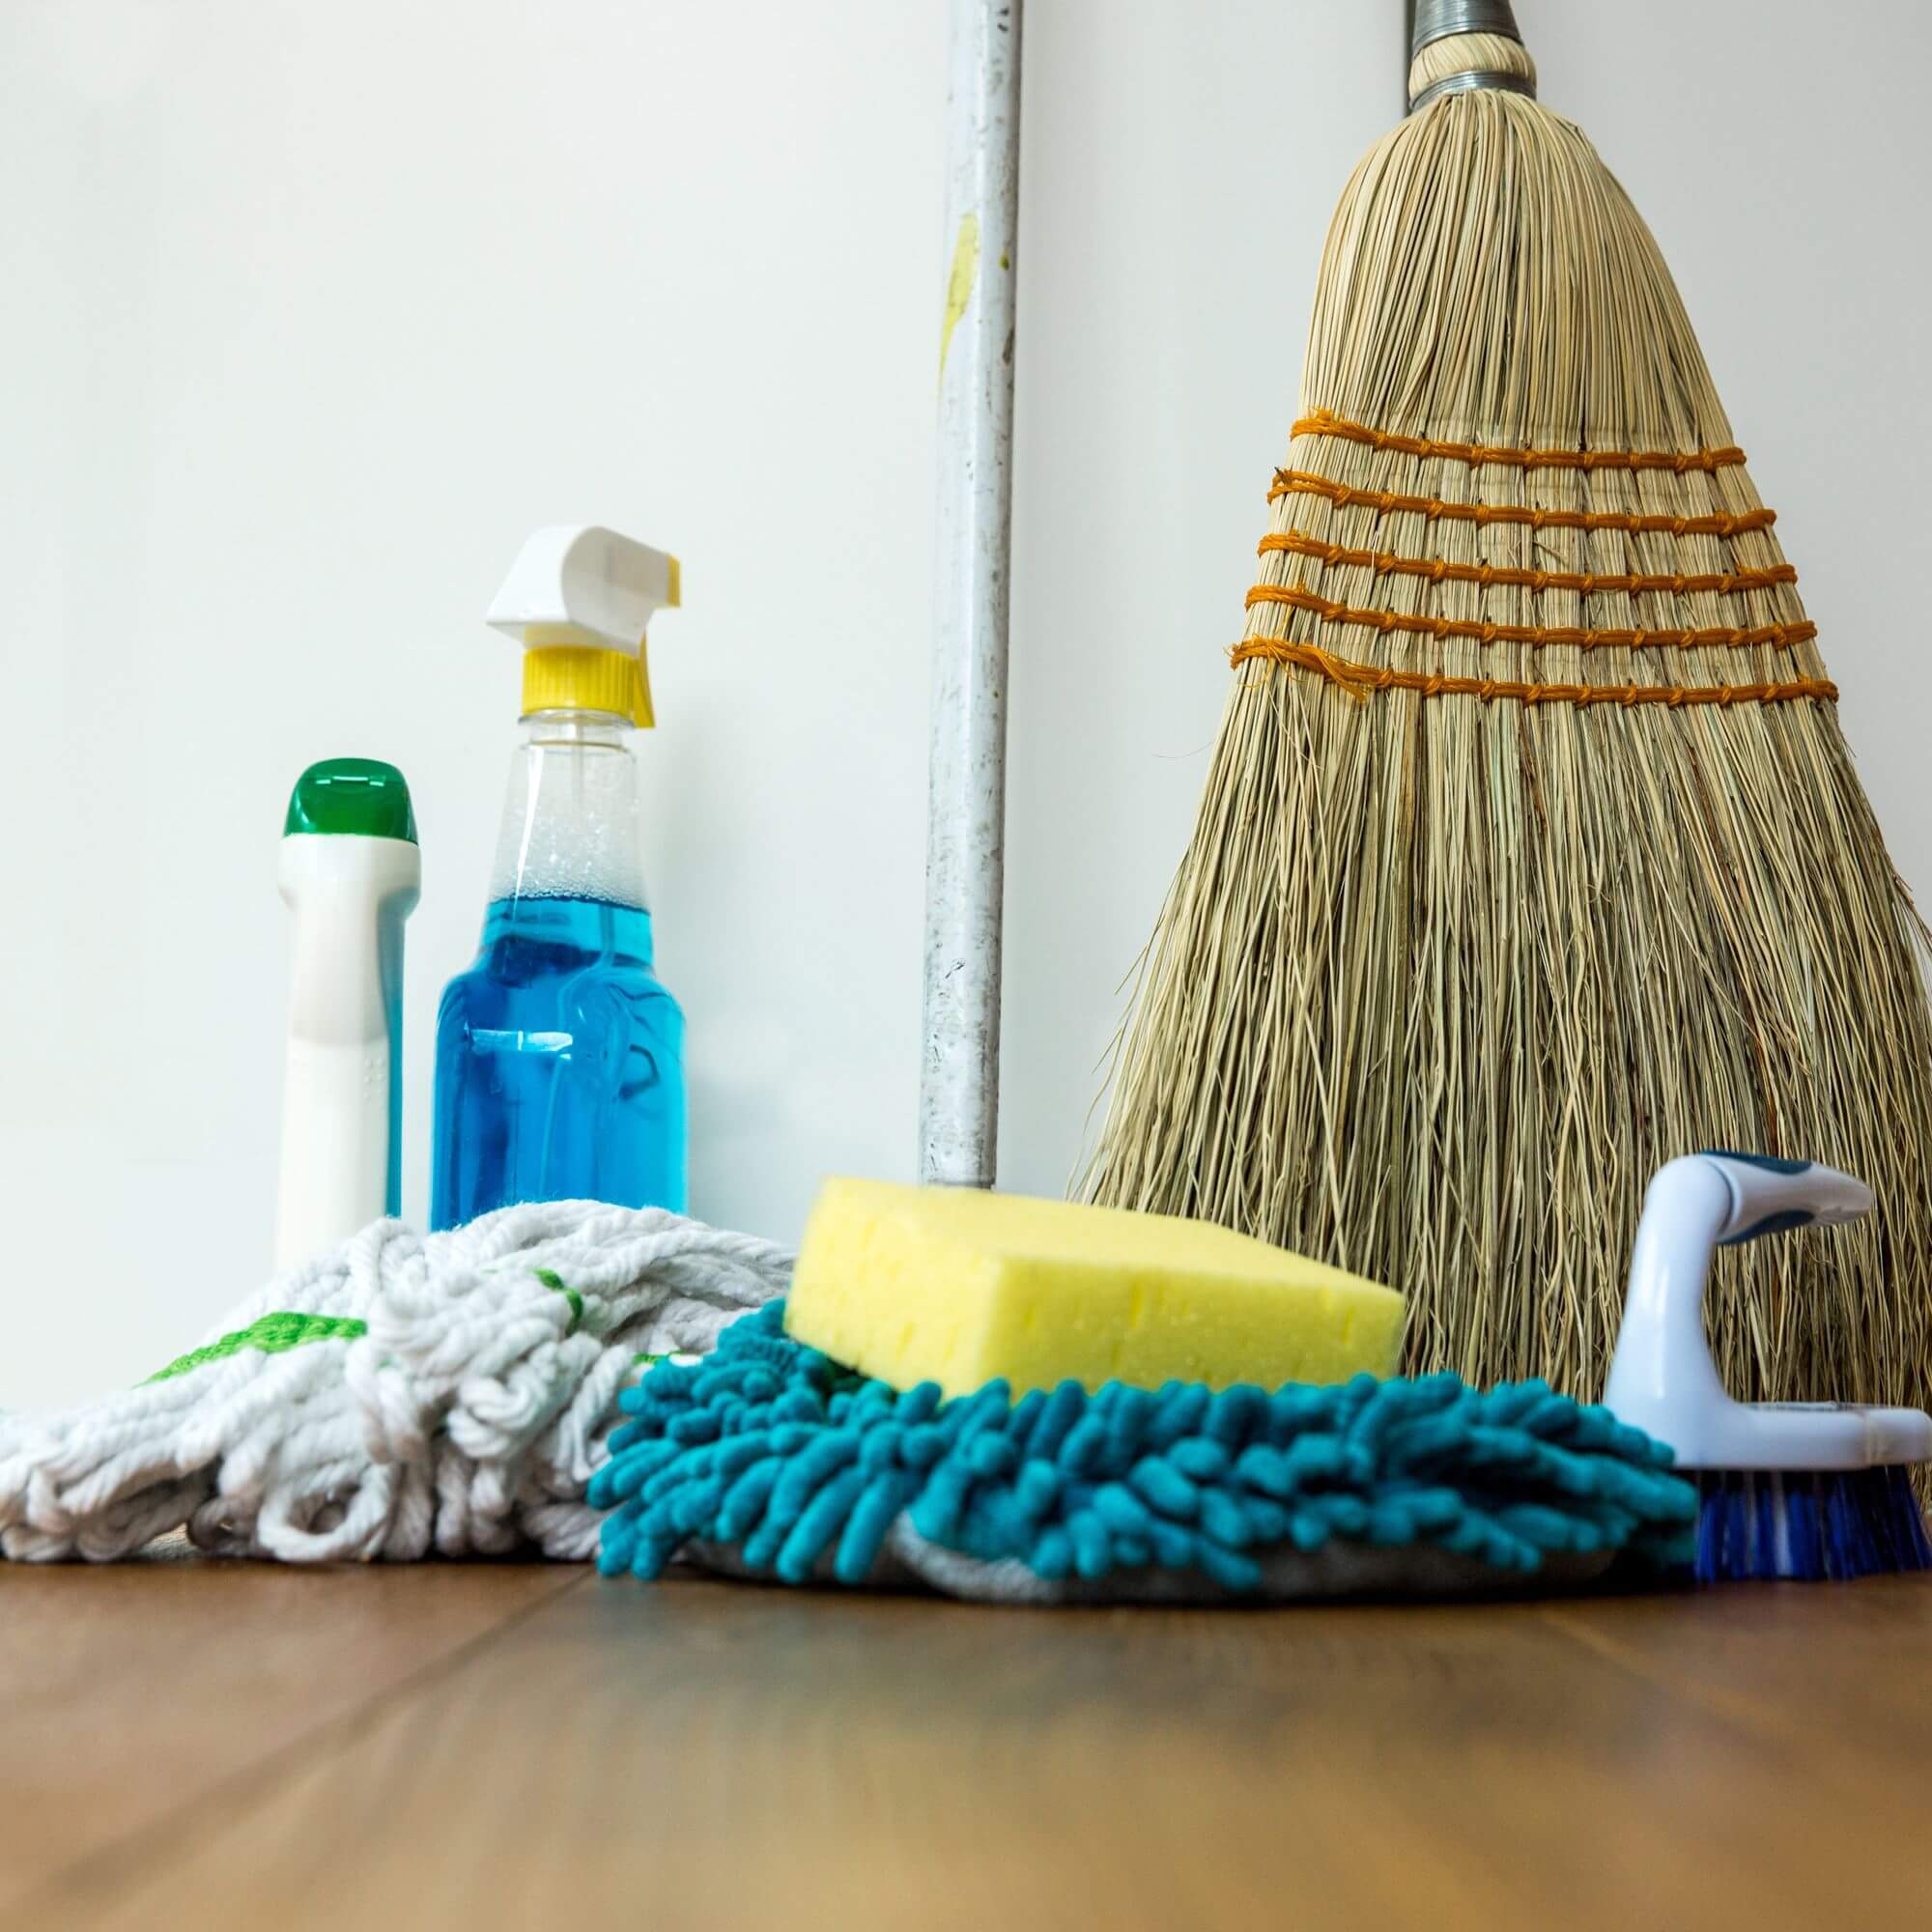 A broom and bottles of cleaning supplies